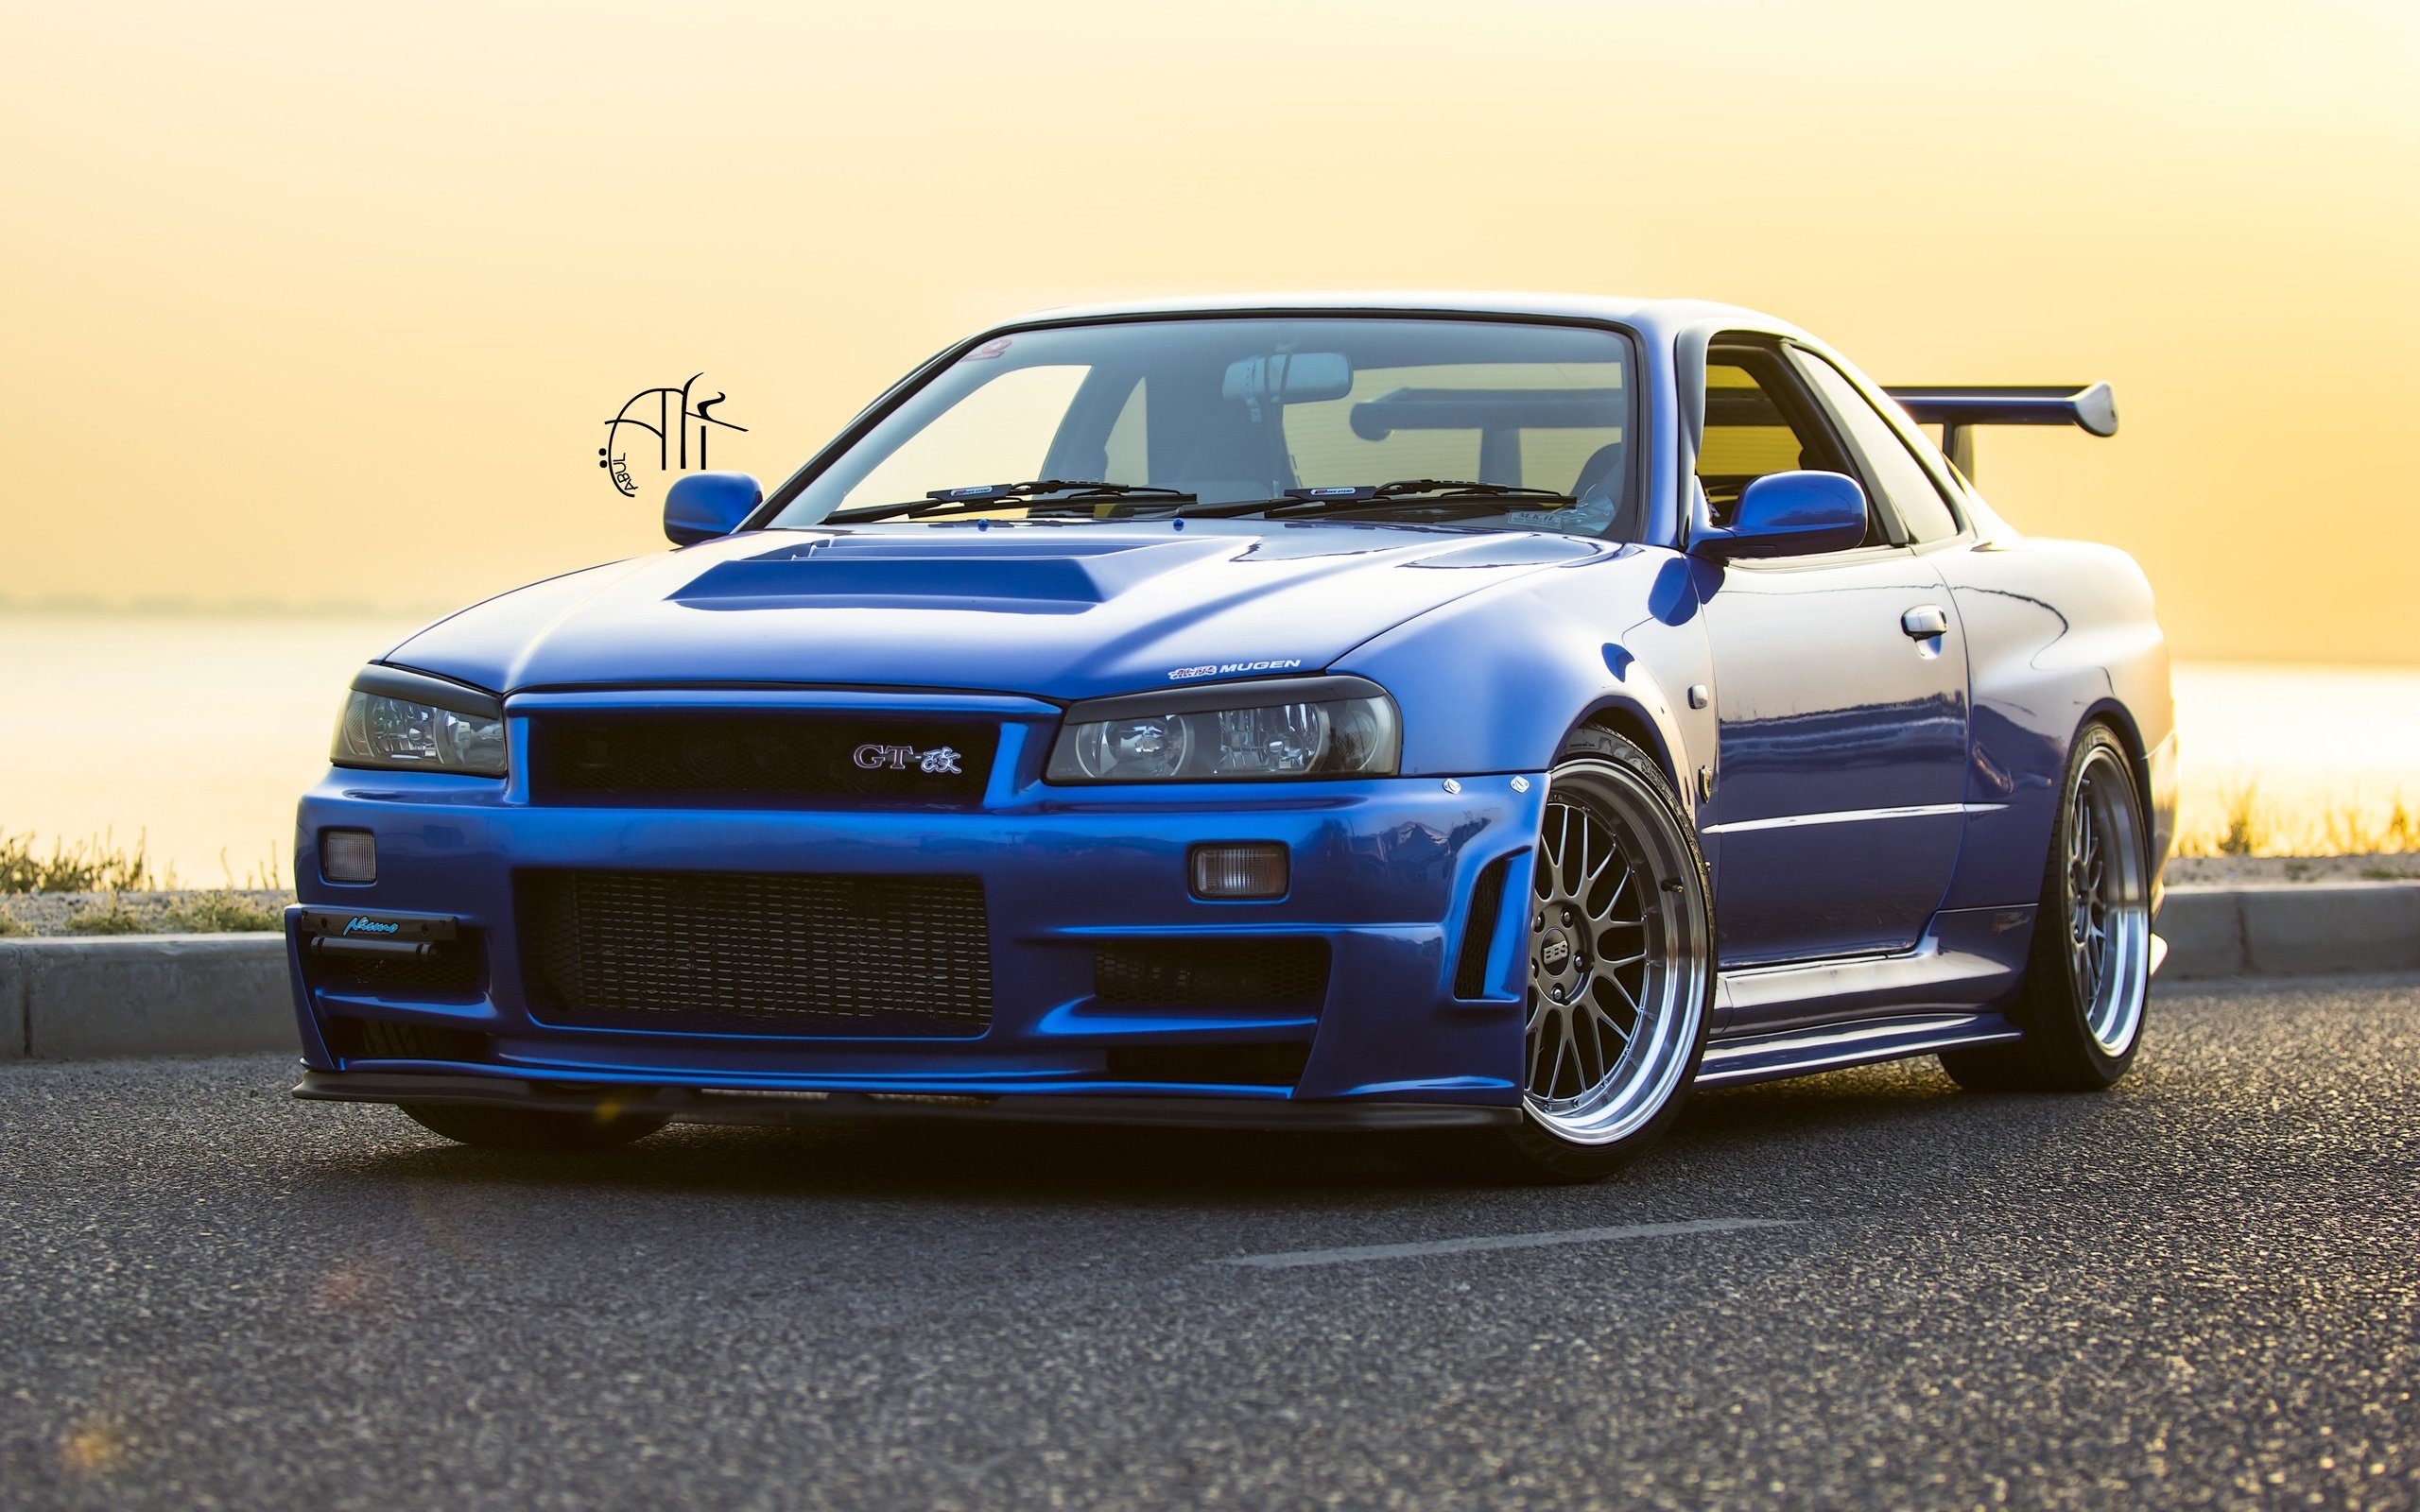 Free Download Nissan Gtr R34 Wallpaper Blue Car Hd Wallpapers Pictures 2560x1600 For Your Desktop Mobile Tablet Explore 42 Nissan Gtr R34 Wallpaper Gtr R35 Wallpaper Nissan Skyline Wallpaper